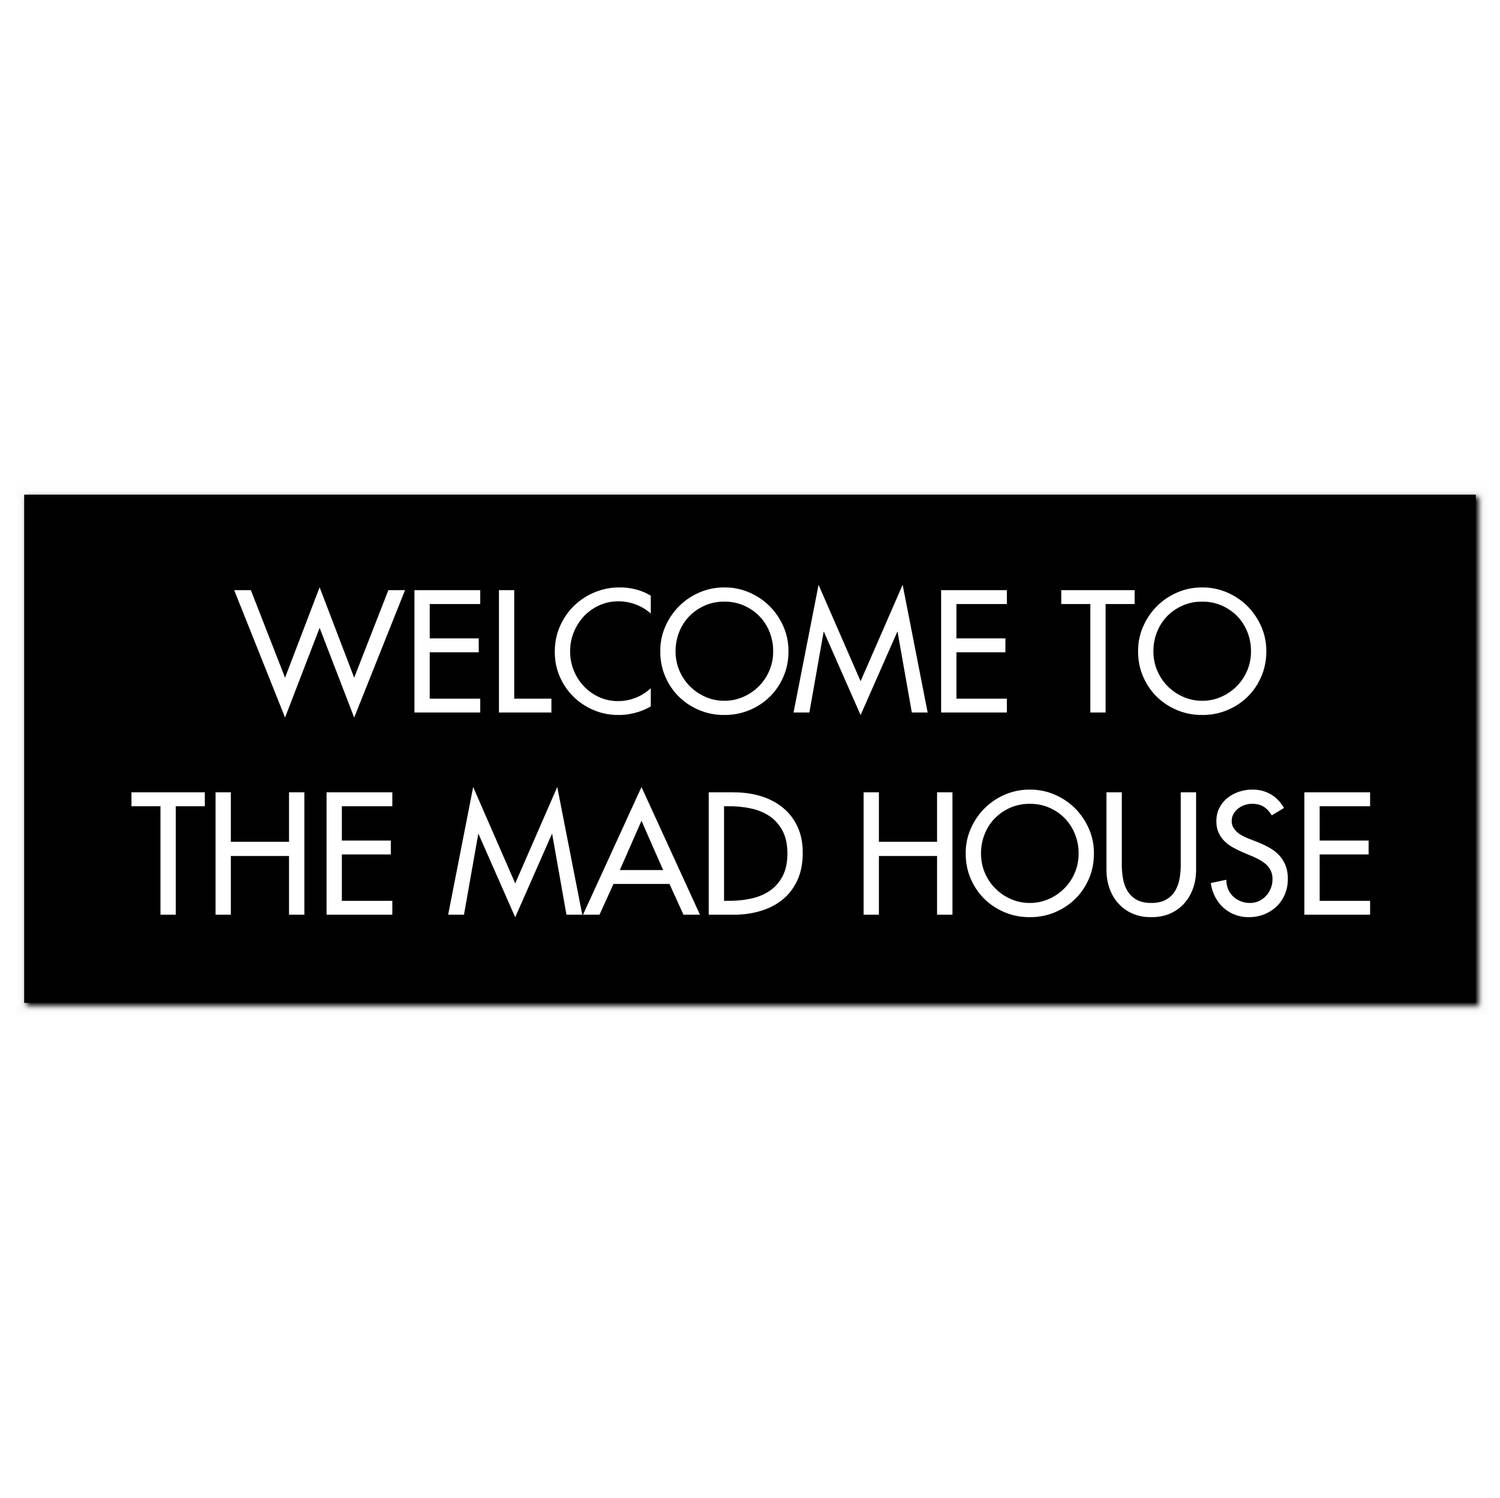 Welcome To The Mad House Silver Foil Plaque - Image 1